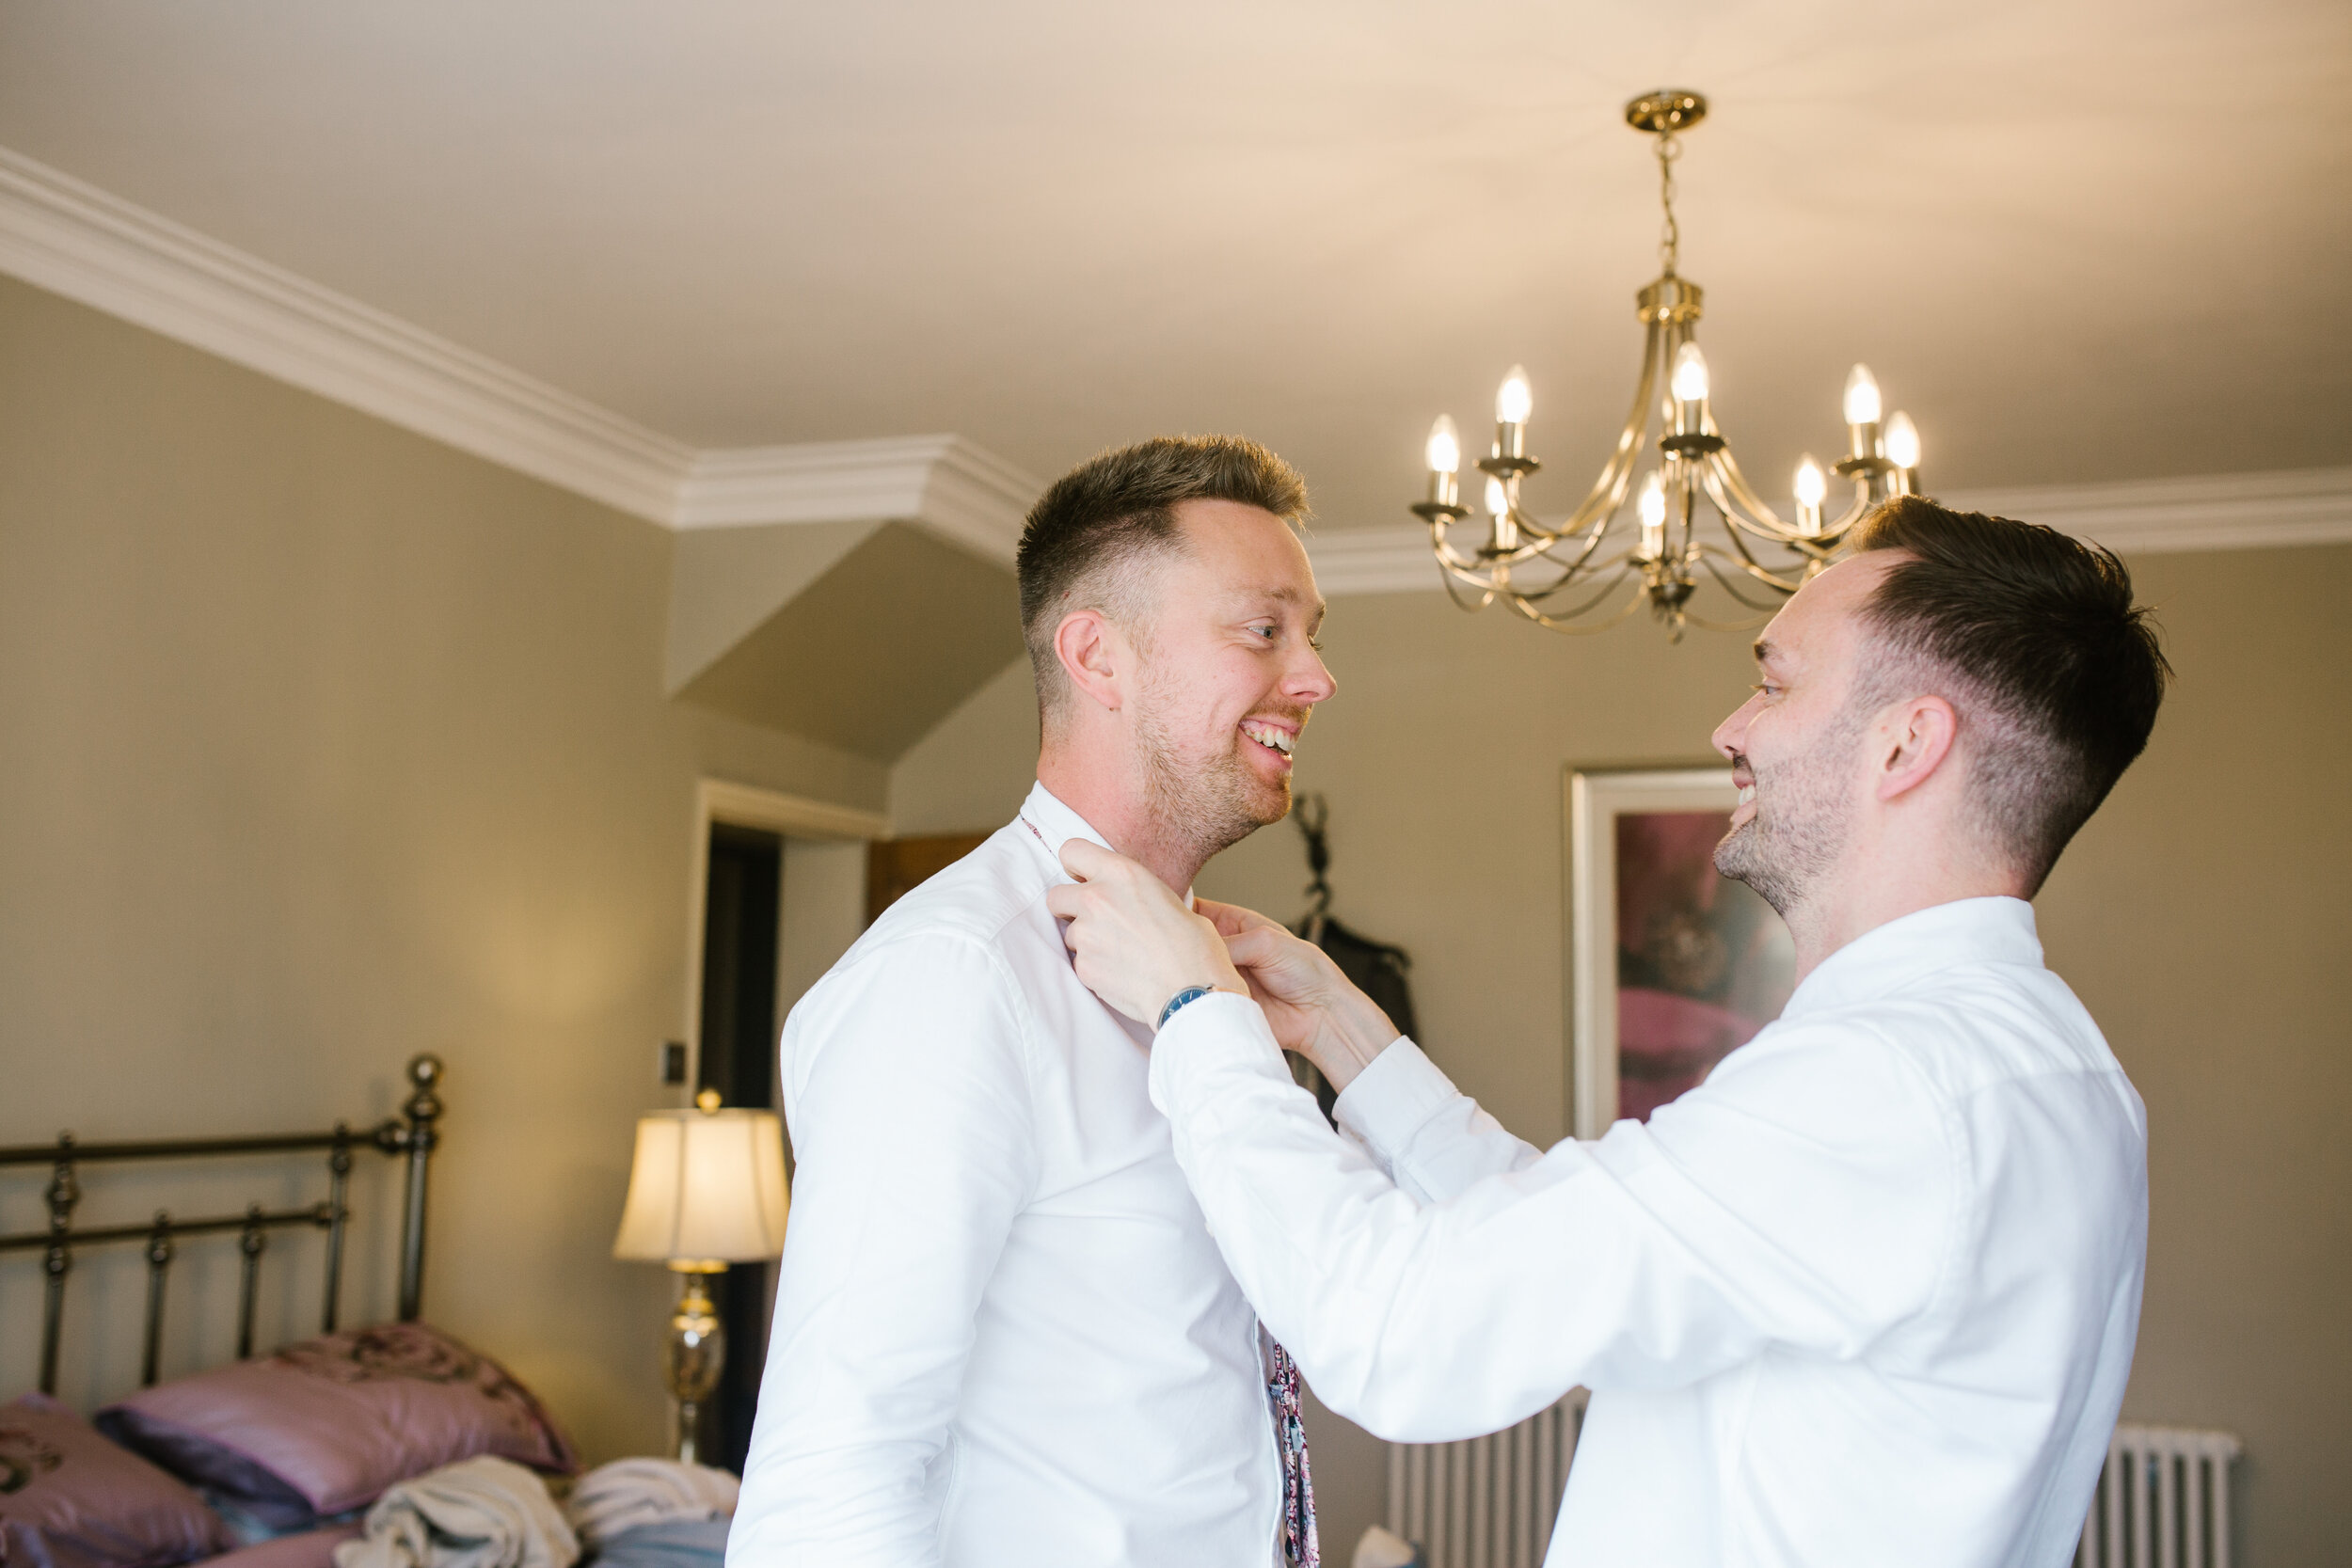 bright fun photo of the two grooms getting each other ready on the morning of their wedding day